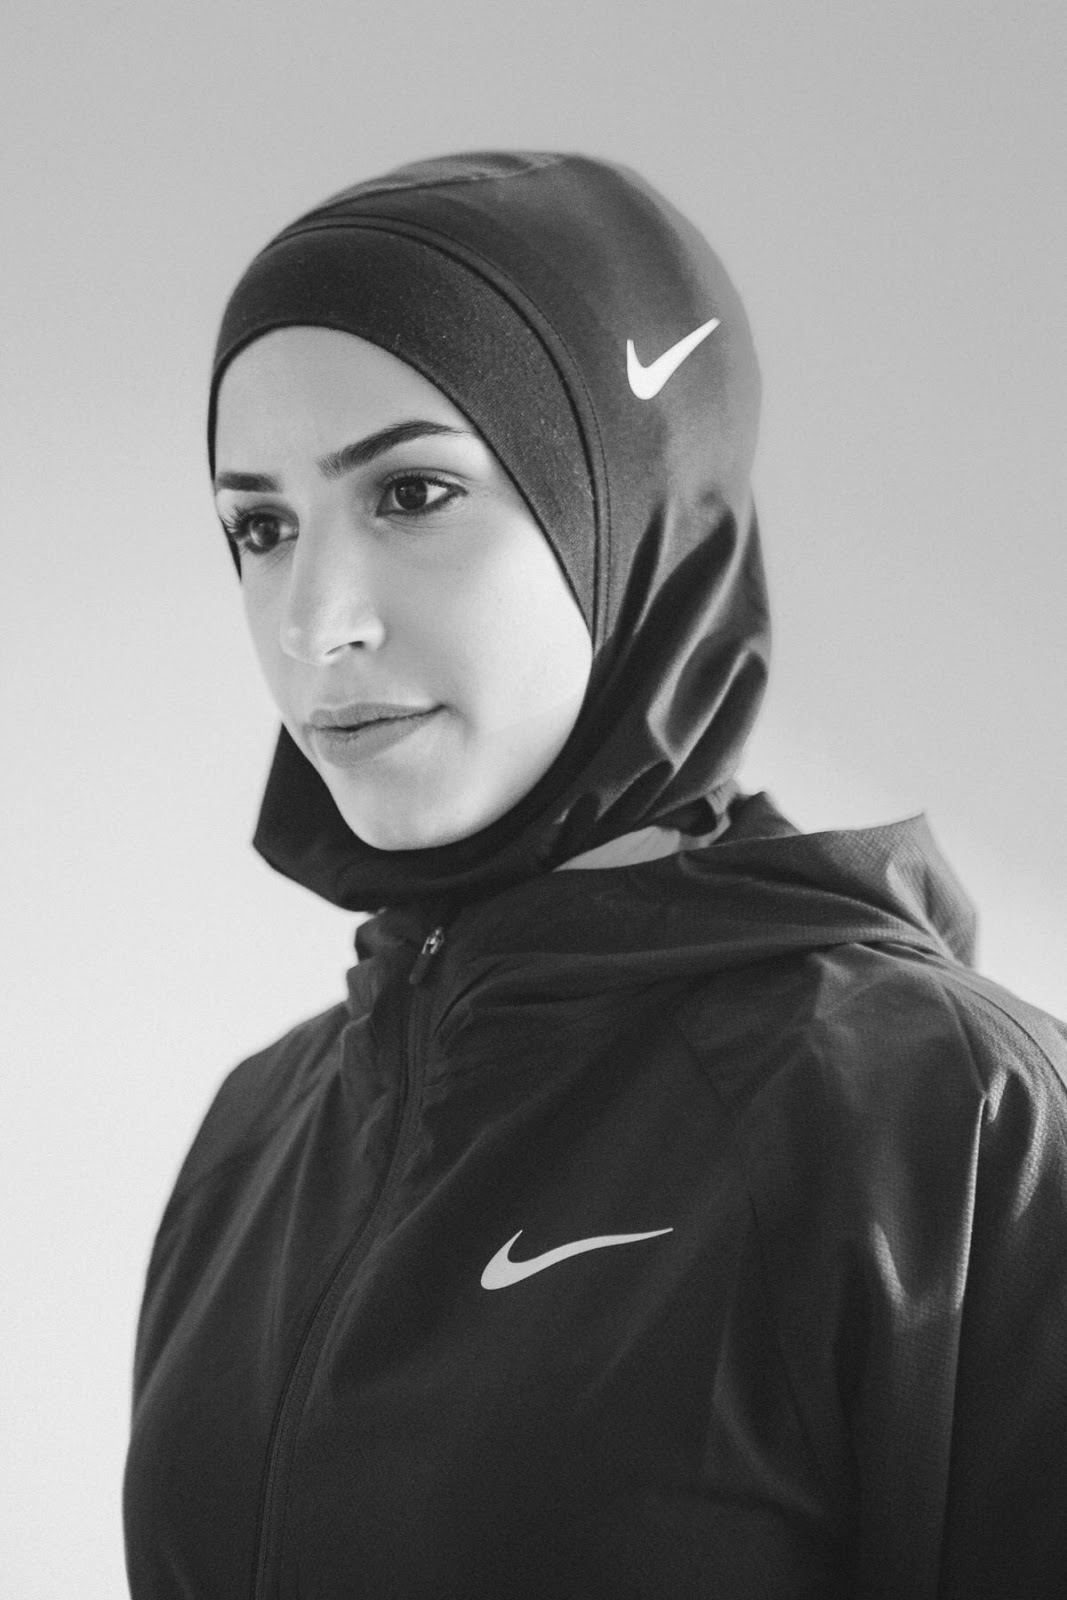 A Tuesday Night Memo: On sports: Zeina Nassar is fighting for her dream